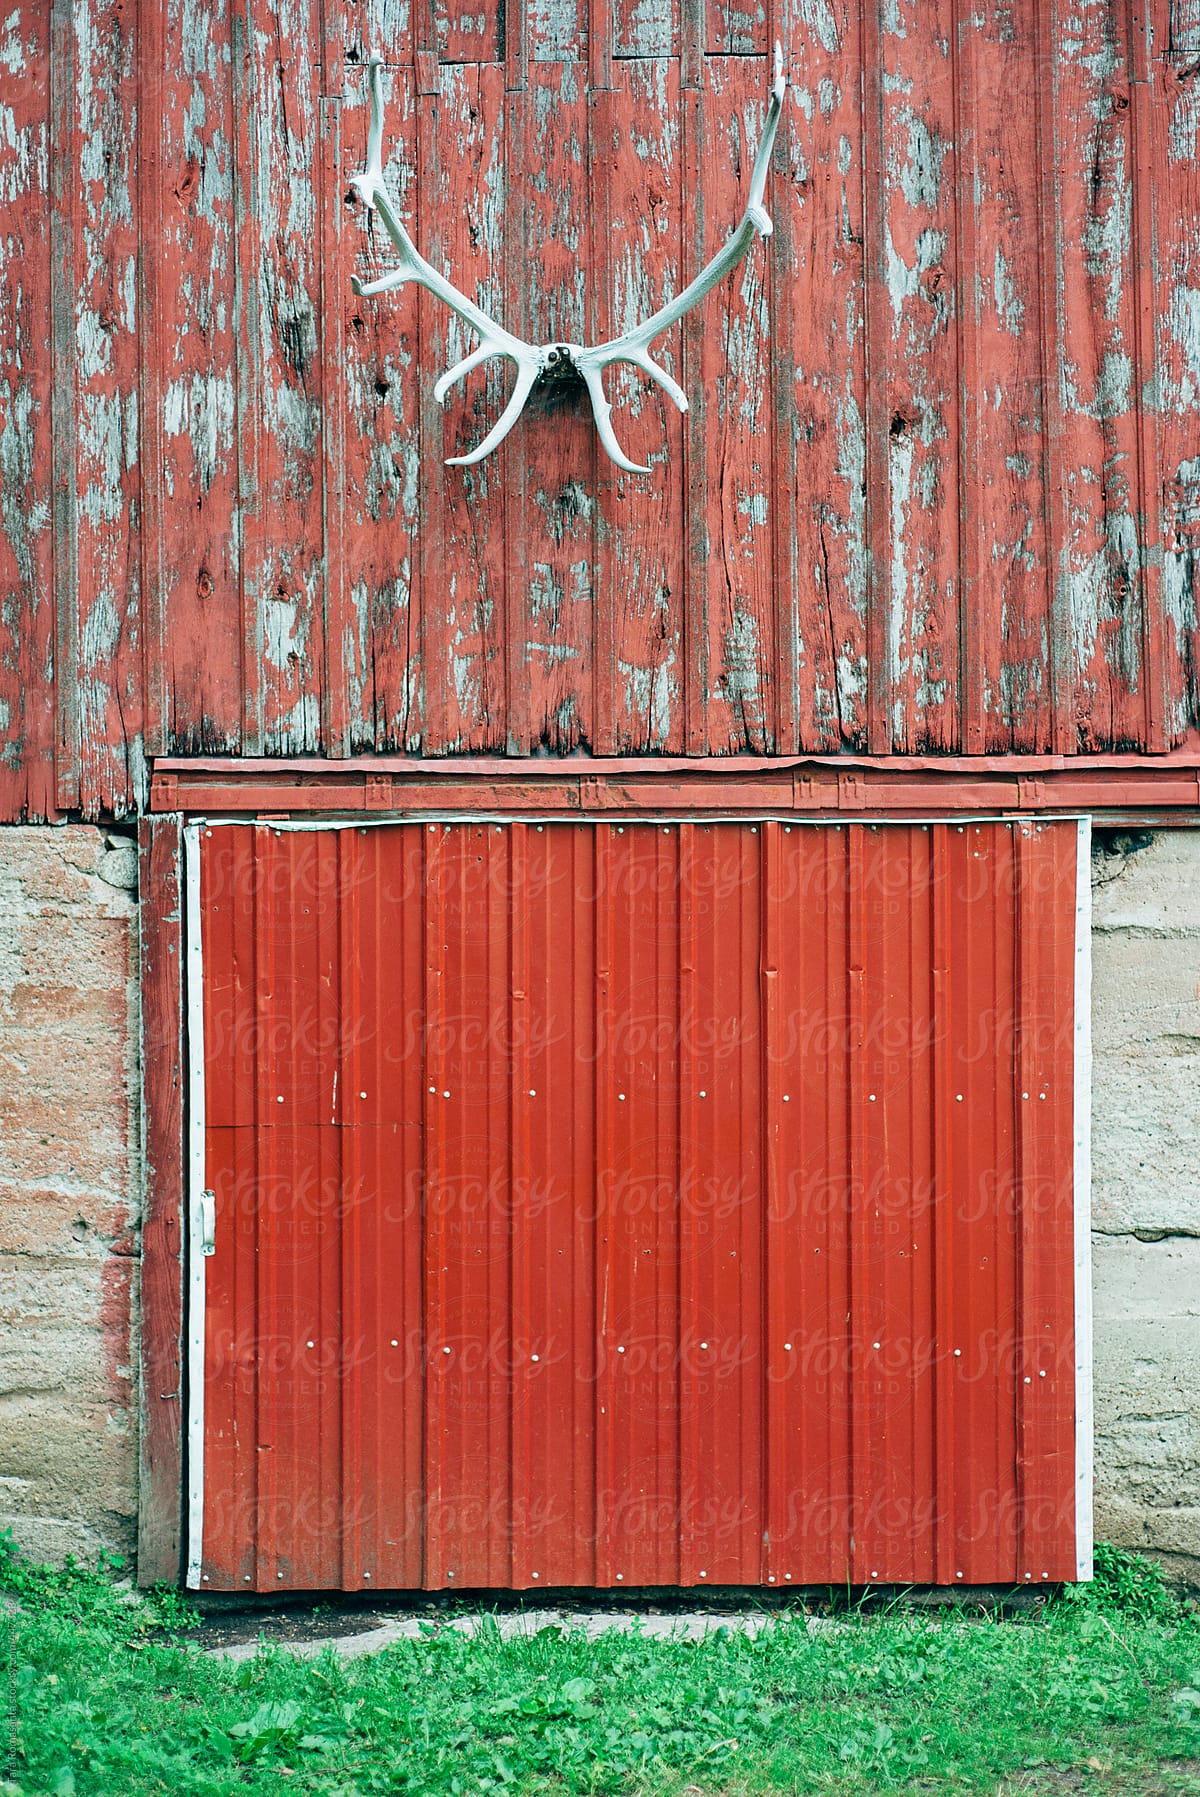 antlers hang above the door of a weathered barn